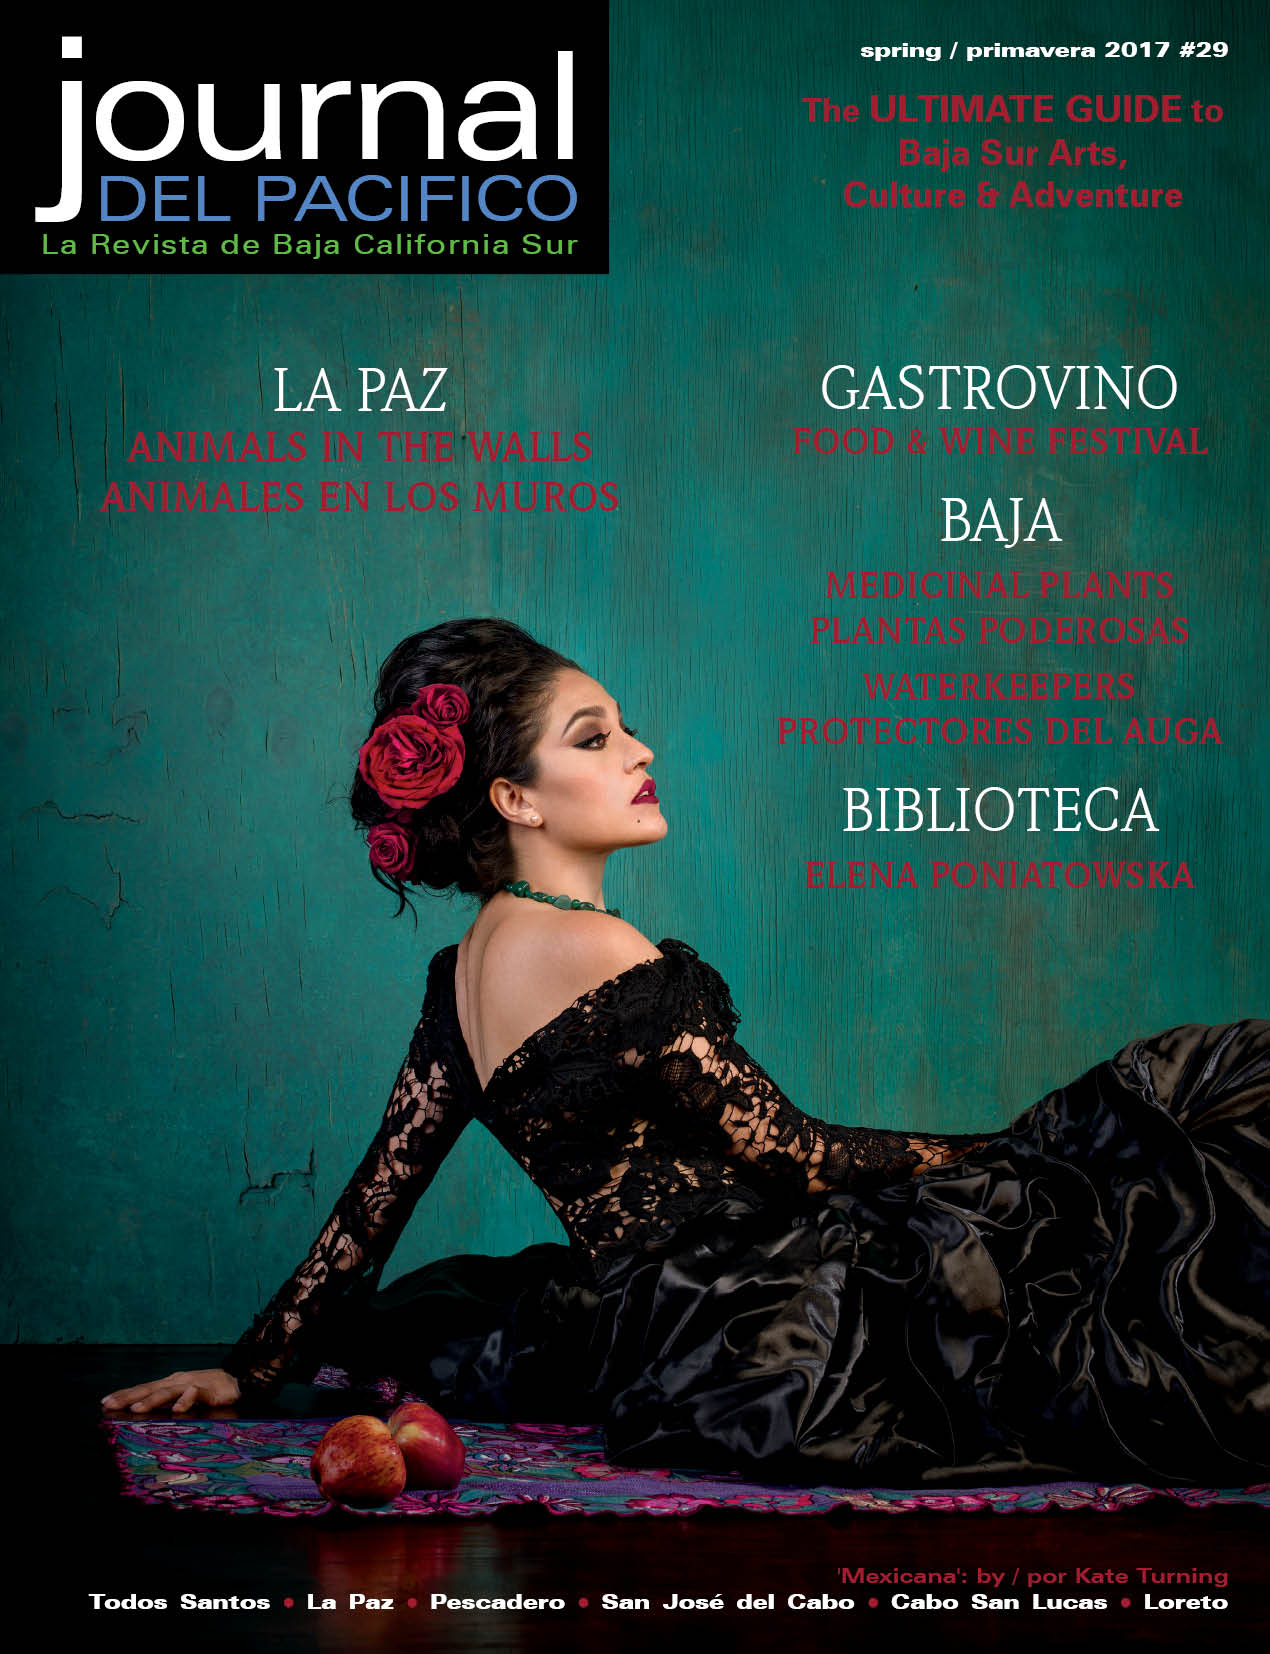 Spring 2017 Issue of Journal del Pacifico